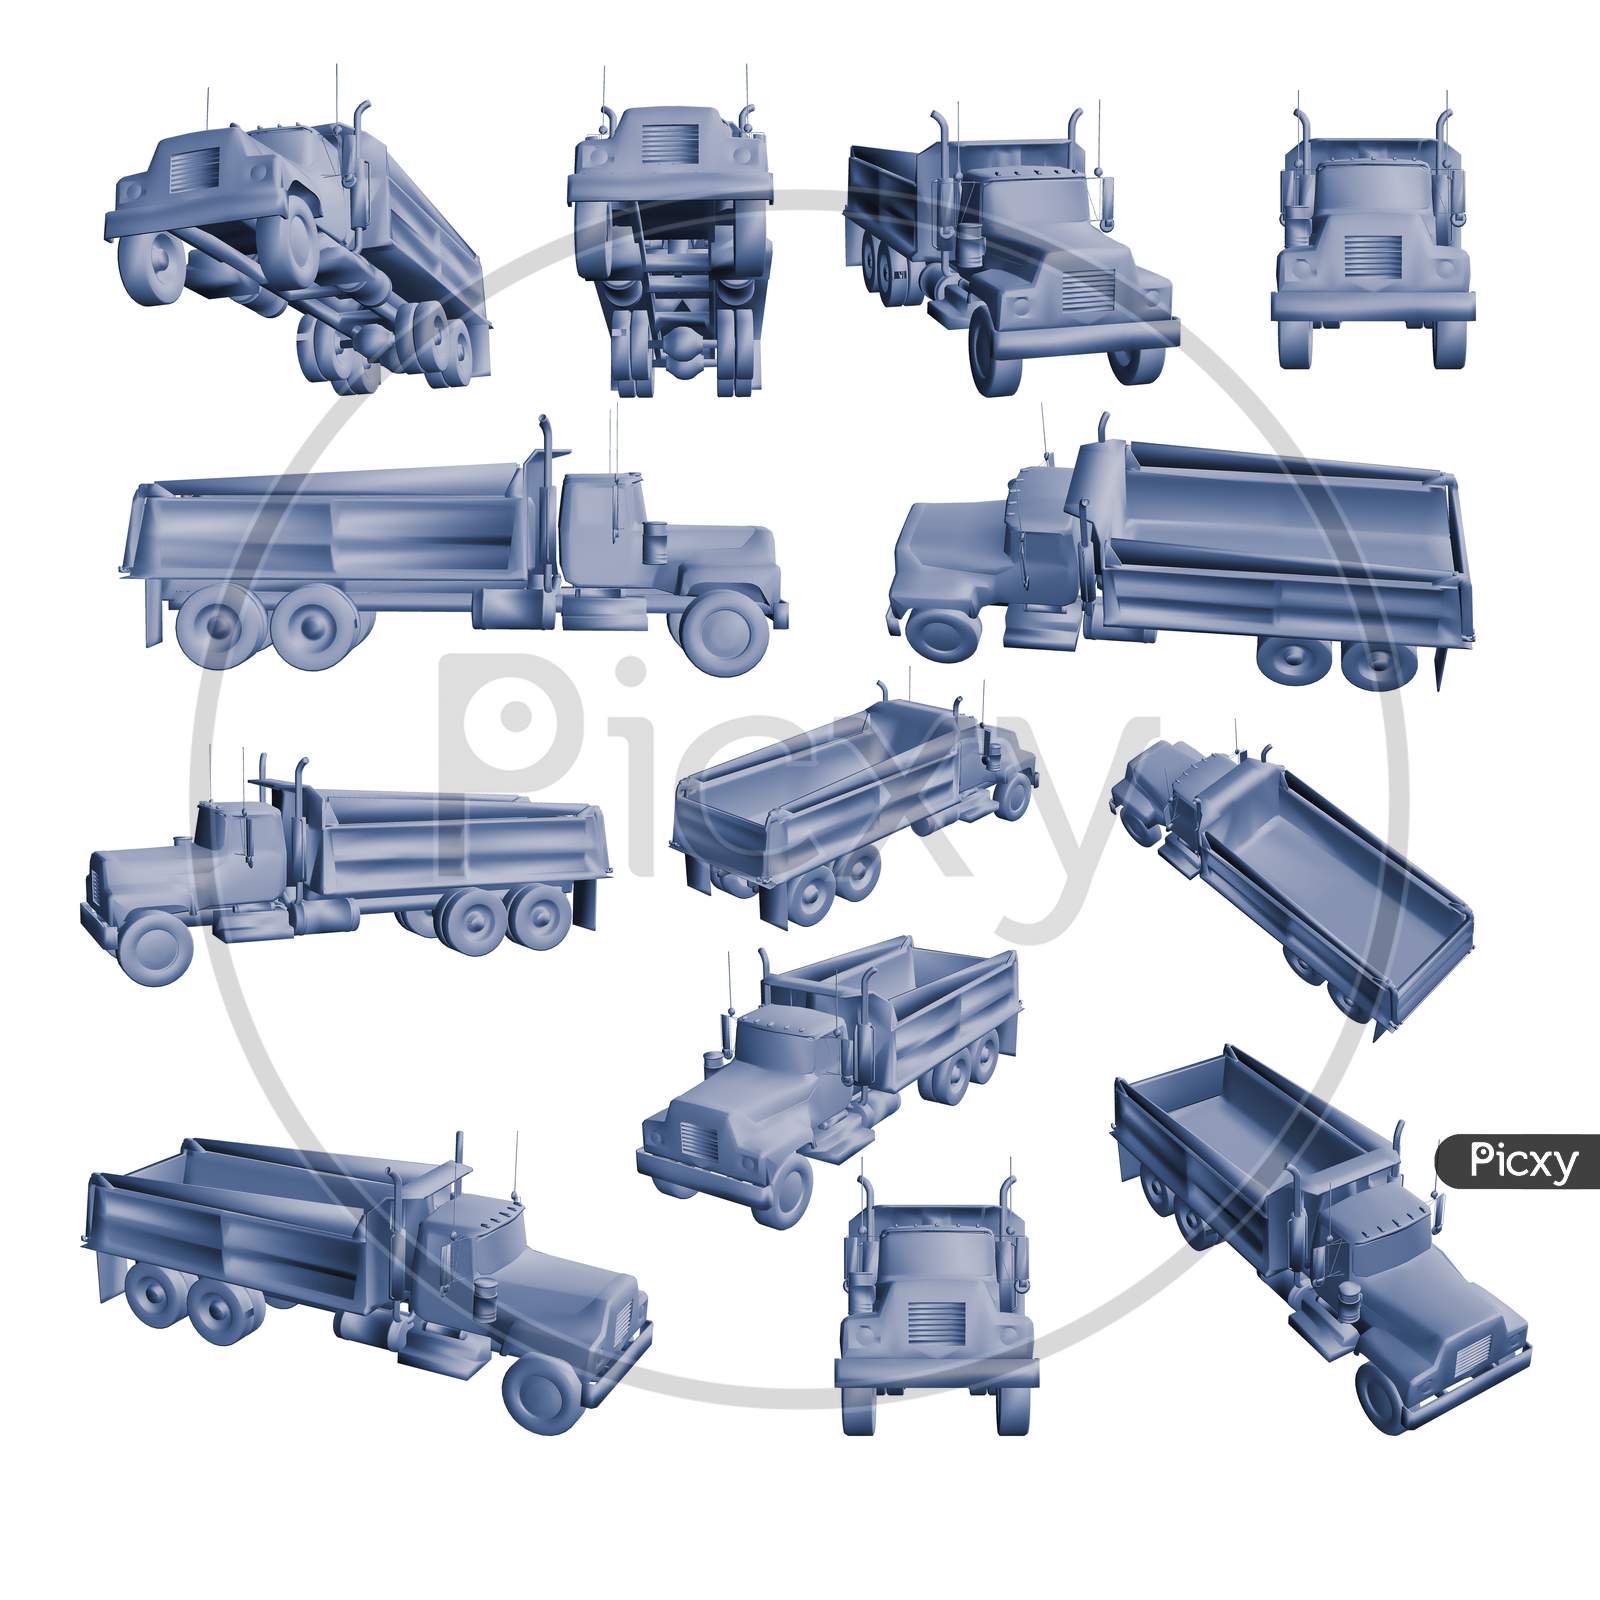 3D Truck Model Set Isolated On A Light Background. 3D Rendering Illustration Truck Set Of Different Views For Vfx And Animation Movie And Video Game Projects.